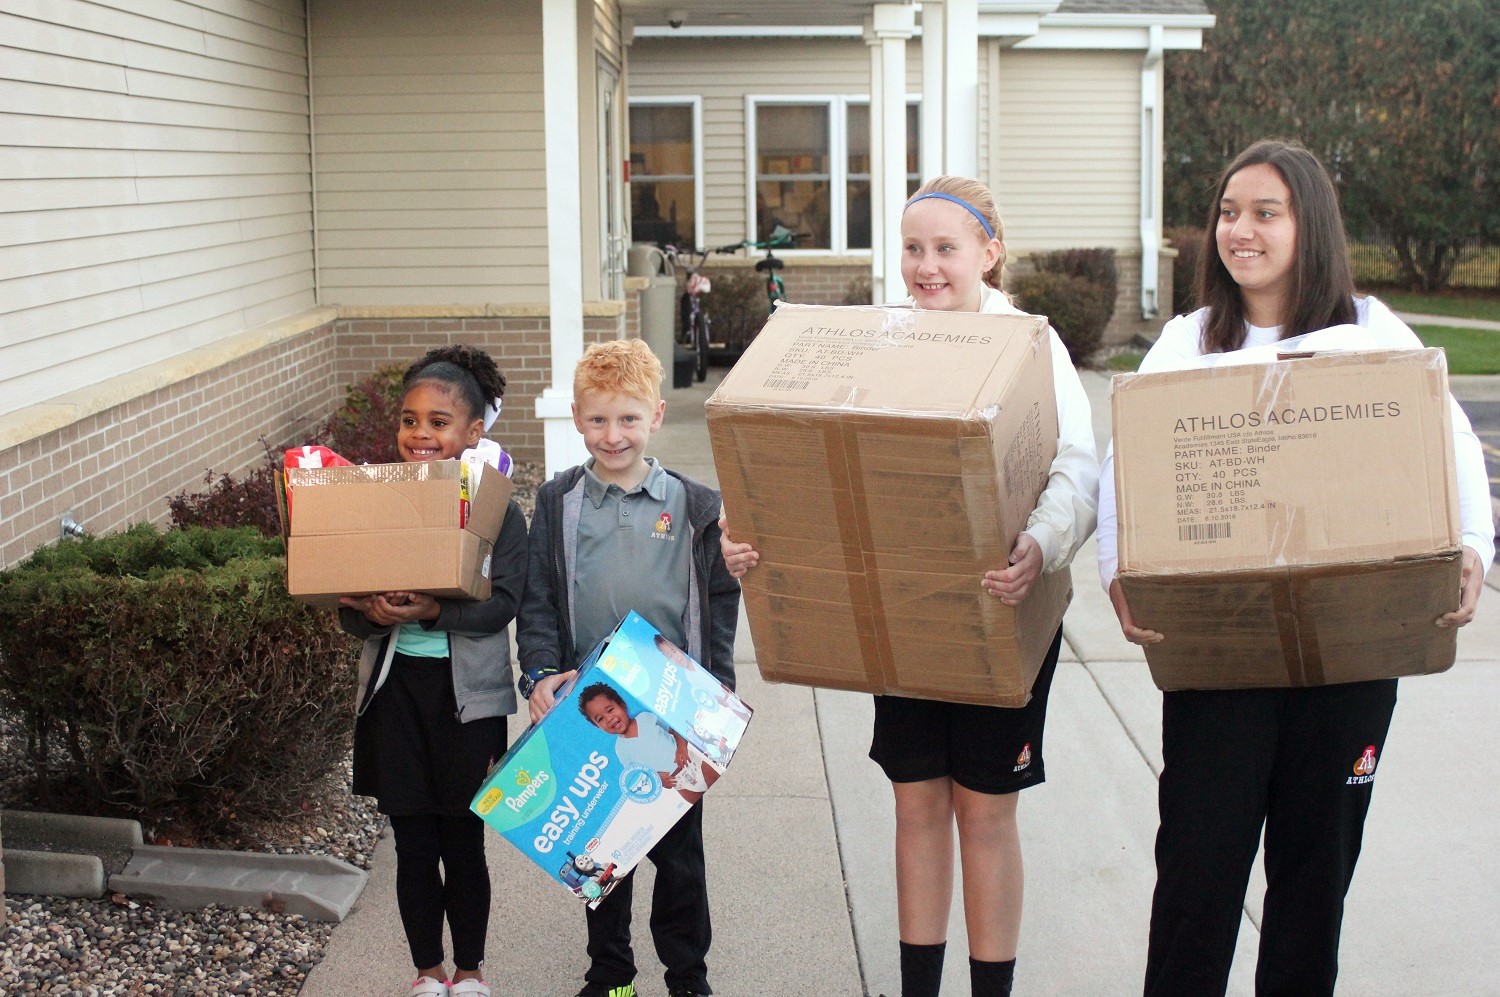 Students displaying integrity through donations